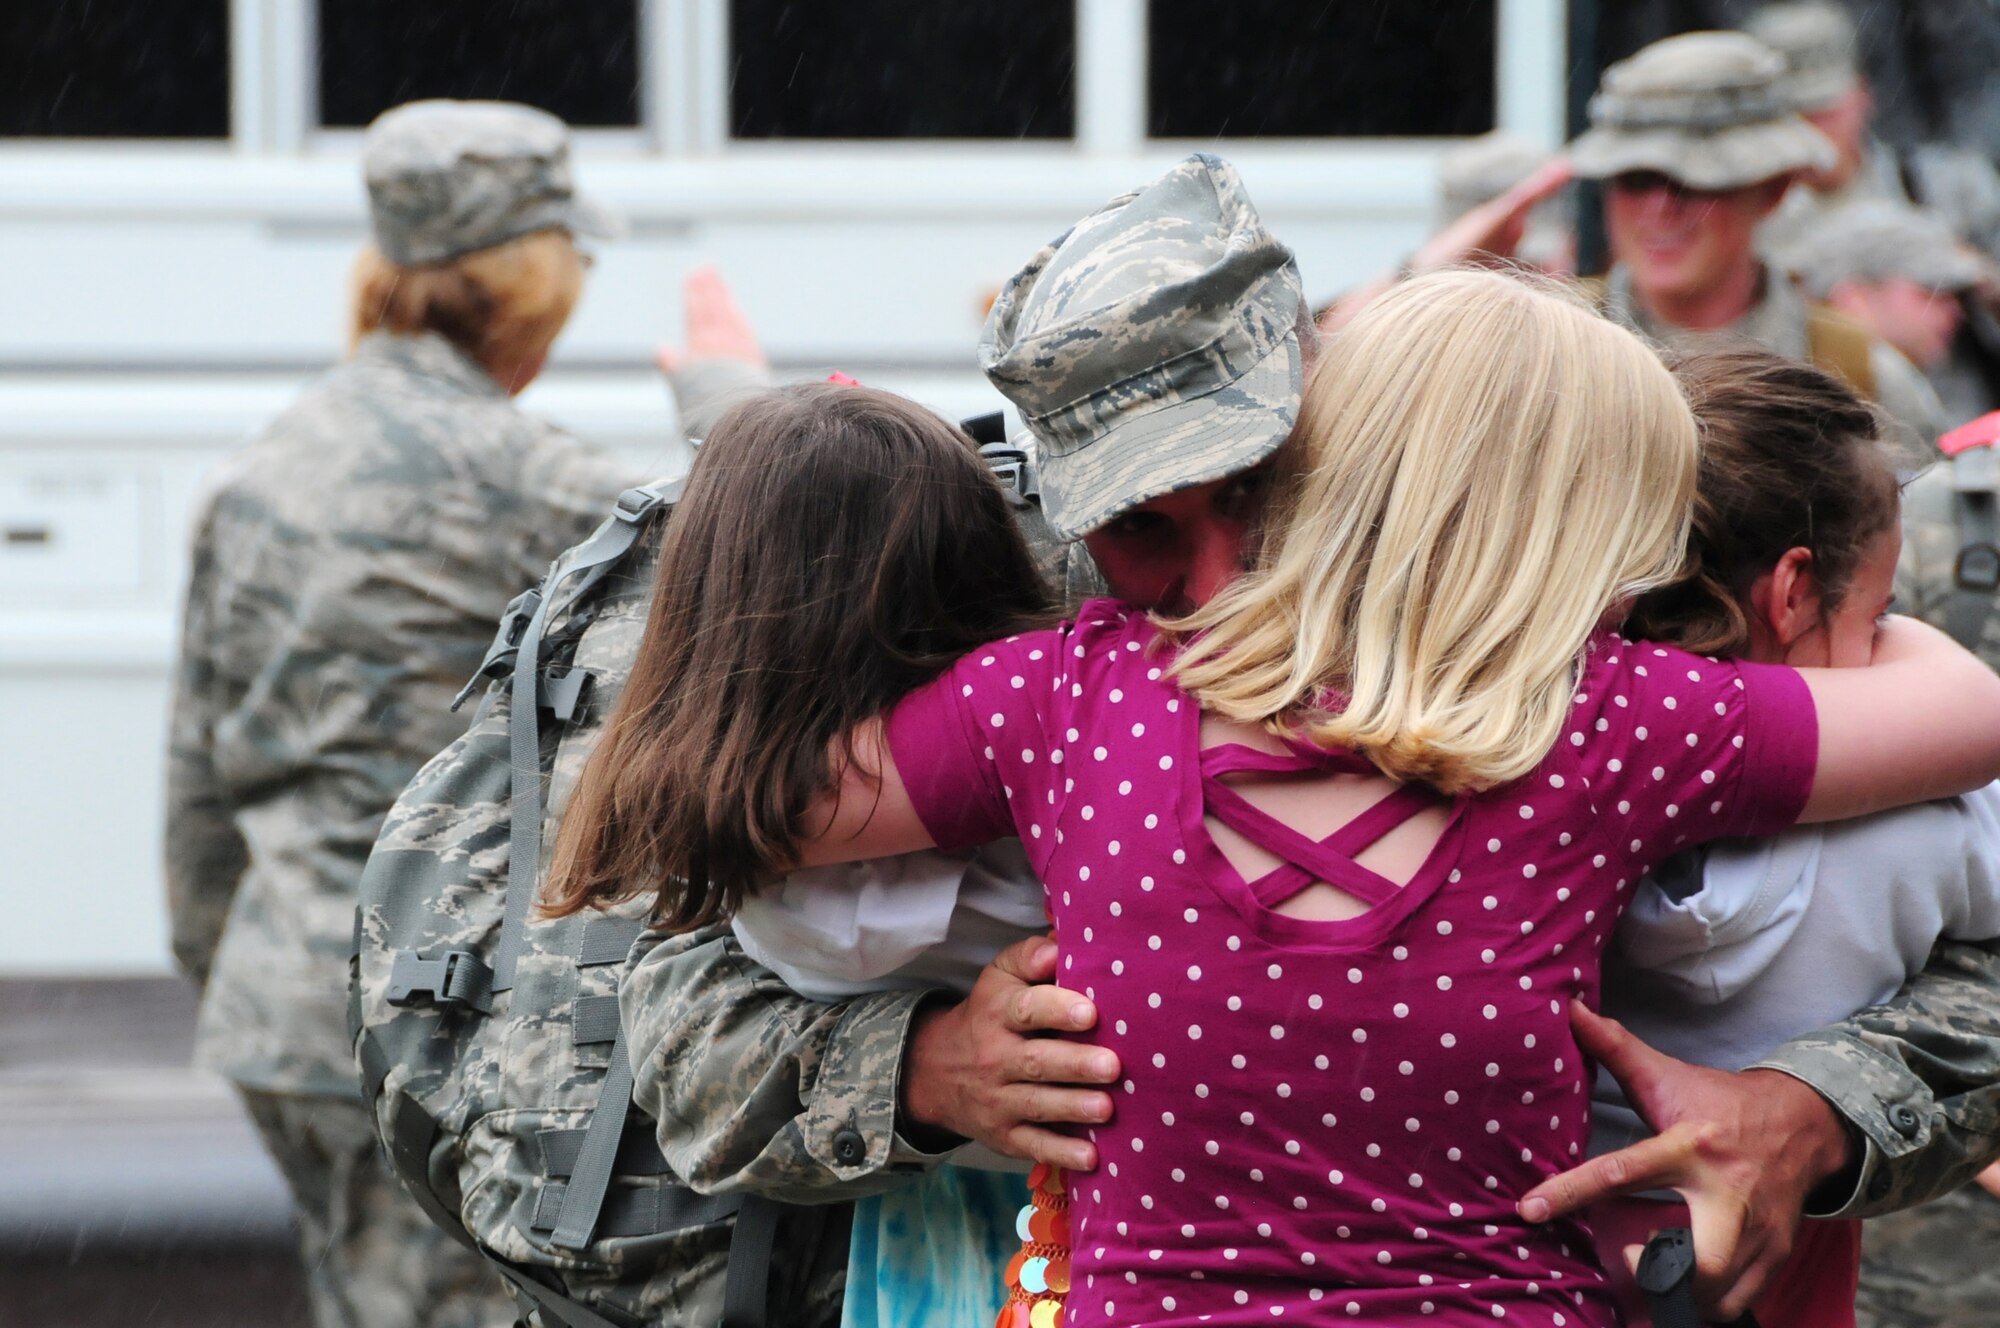 U.S. Air Force Senior Master Sgt. James Picconatto, 148th Fighter Wing Security Forces, embraces his three daughters as he arrives home at the Duluth, Minn., based Air National Guard base May 13, 2010. Approximately 35 Air National Guard members of the 148th Fighter Wing Security Forces Squadron returned to Duluth, Minn., after a 6-month deployment in southwest Asia. (U.S. Air Force photo by Master Sgt. Jason W. Rolfe/Released)